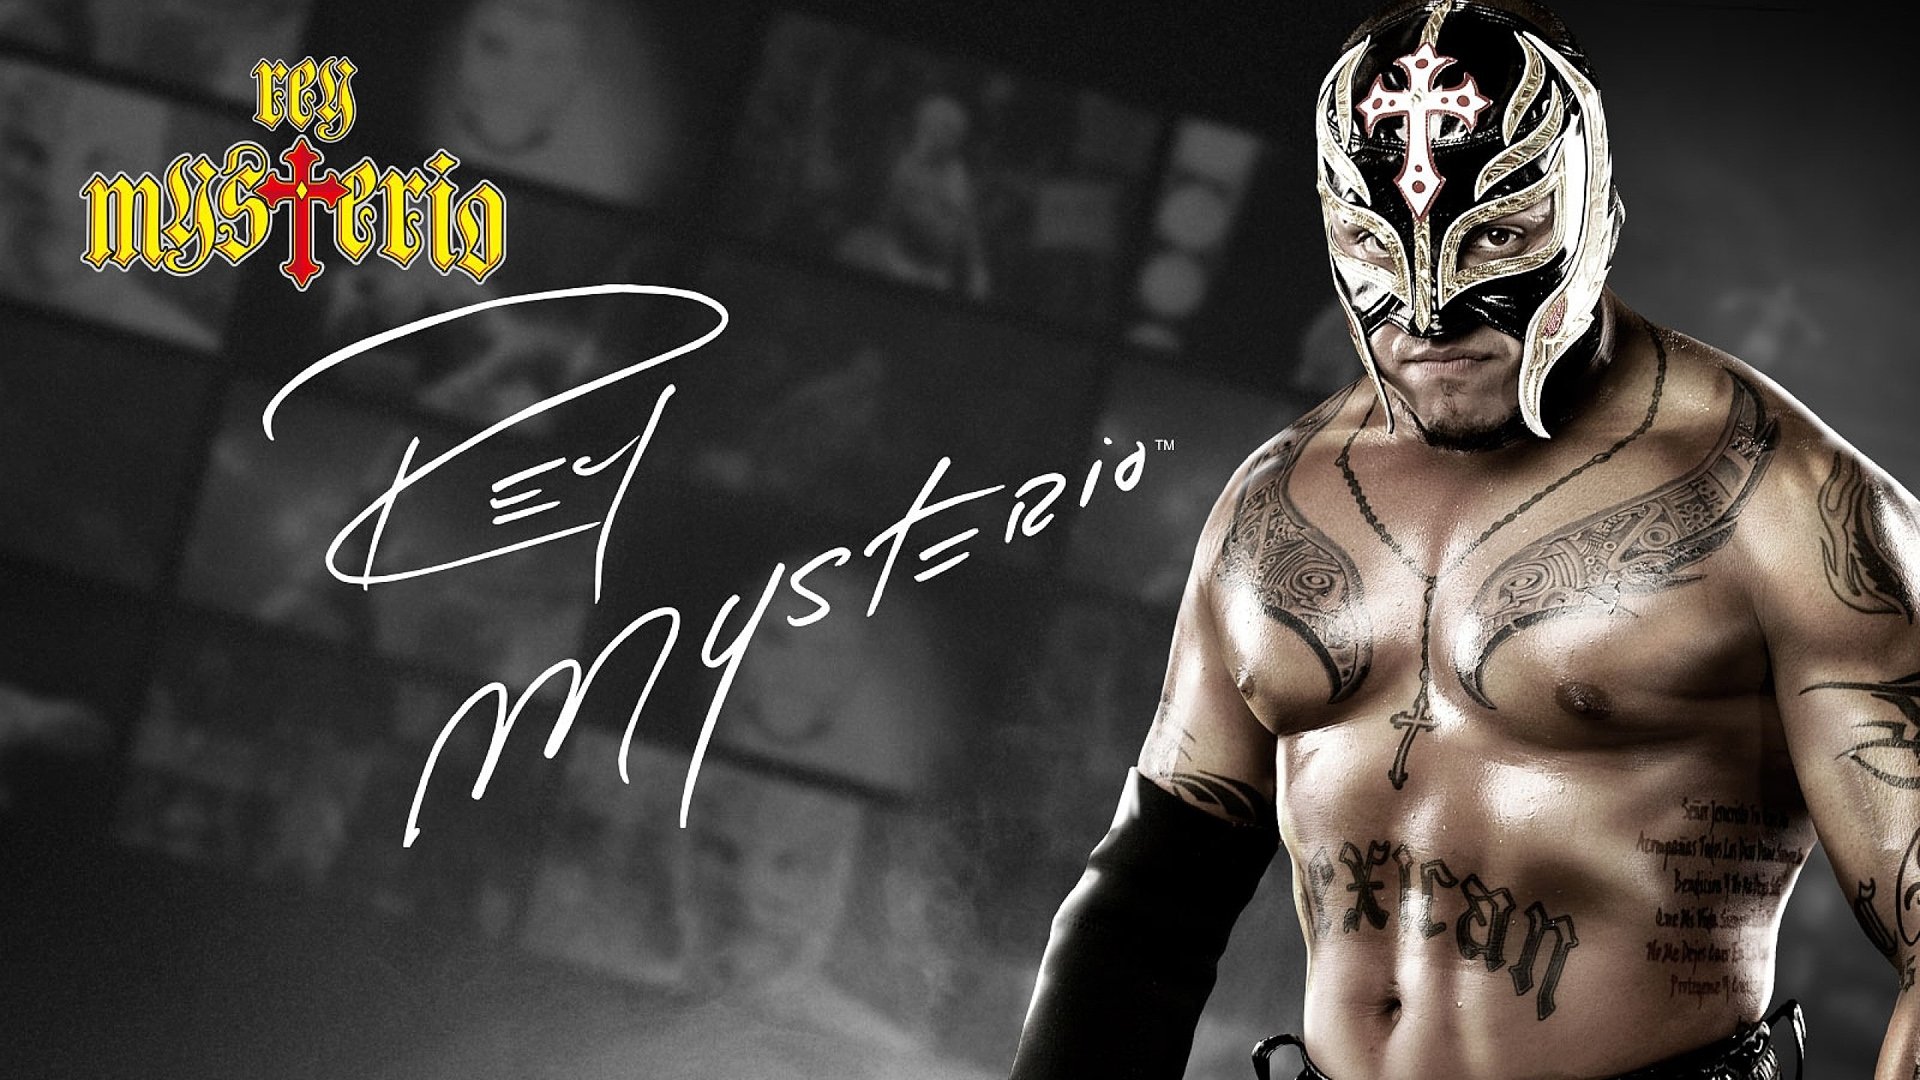 HD wallpaper Rey Mysterio Blue Mask Rey Mysterio WWE tattoo adult one  person  Wallpaper Flare